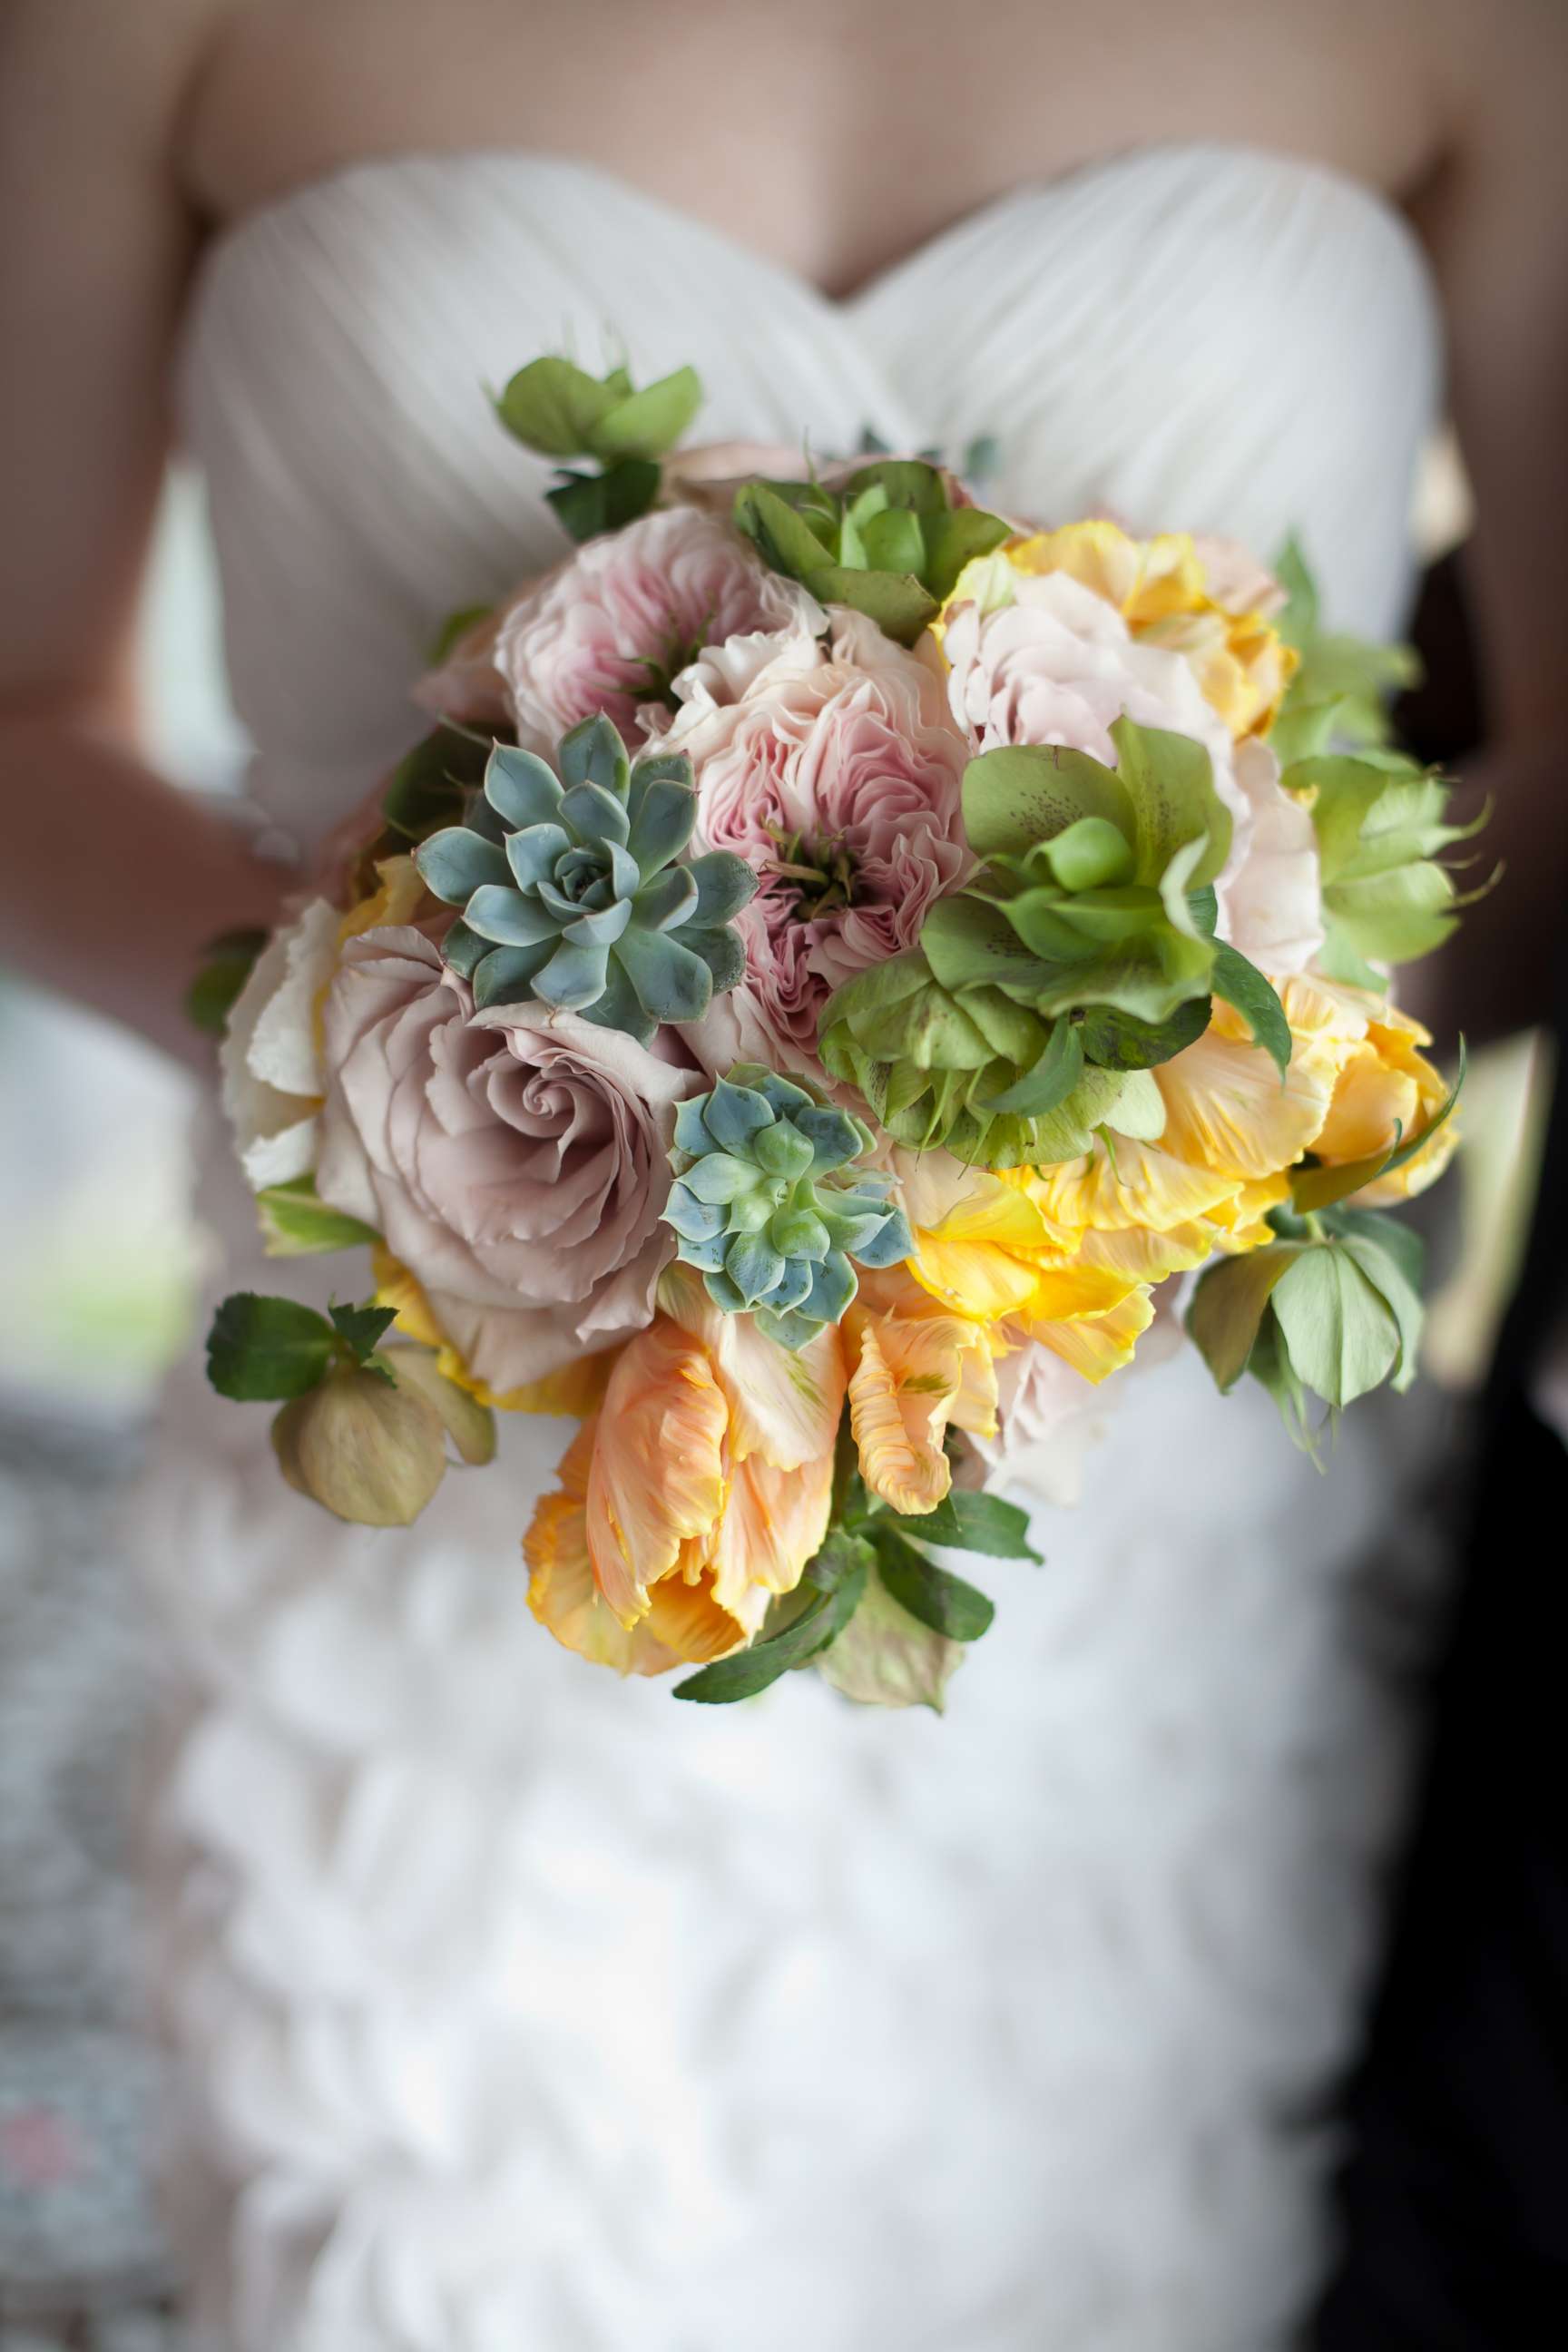 PHOTO: A bride holds a bouquet of roses, garden roses, tulips and succulents in an undated stock photo.